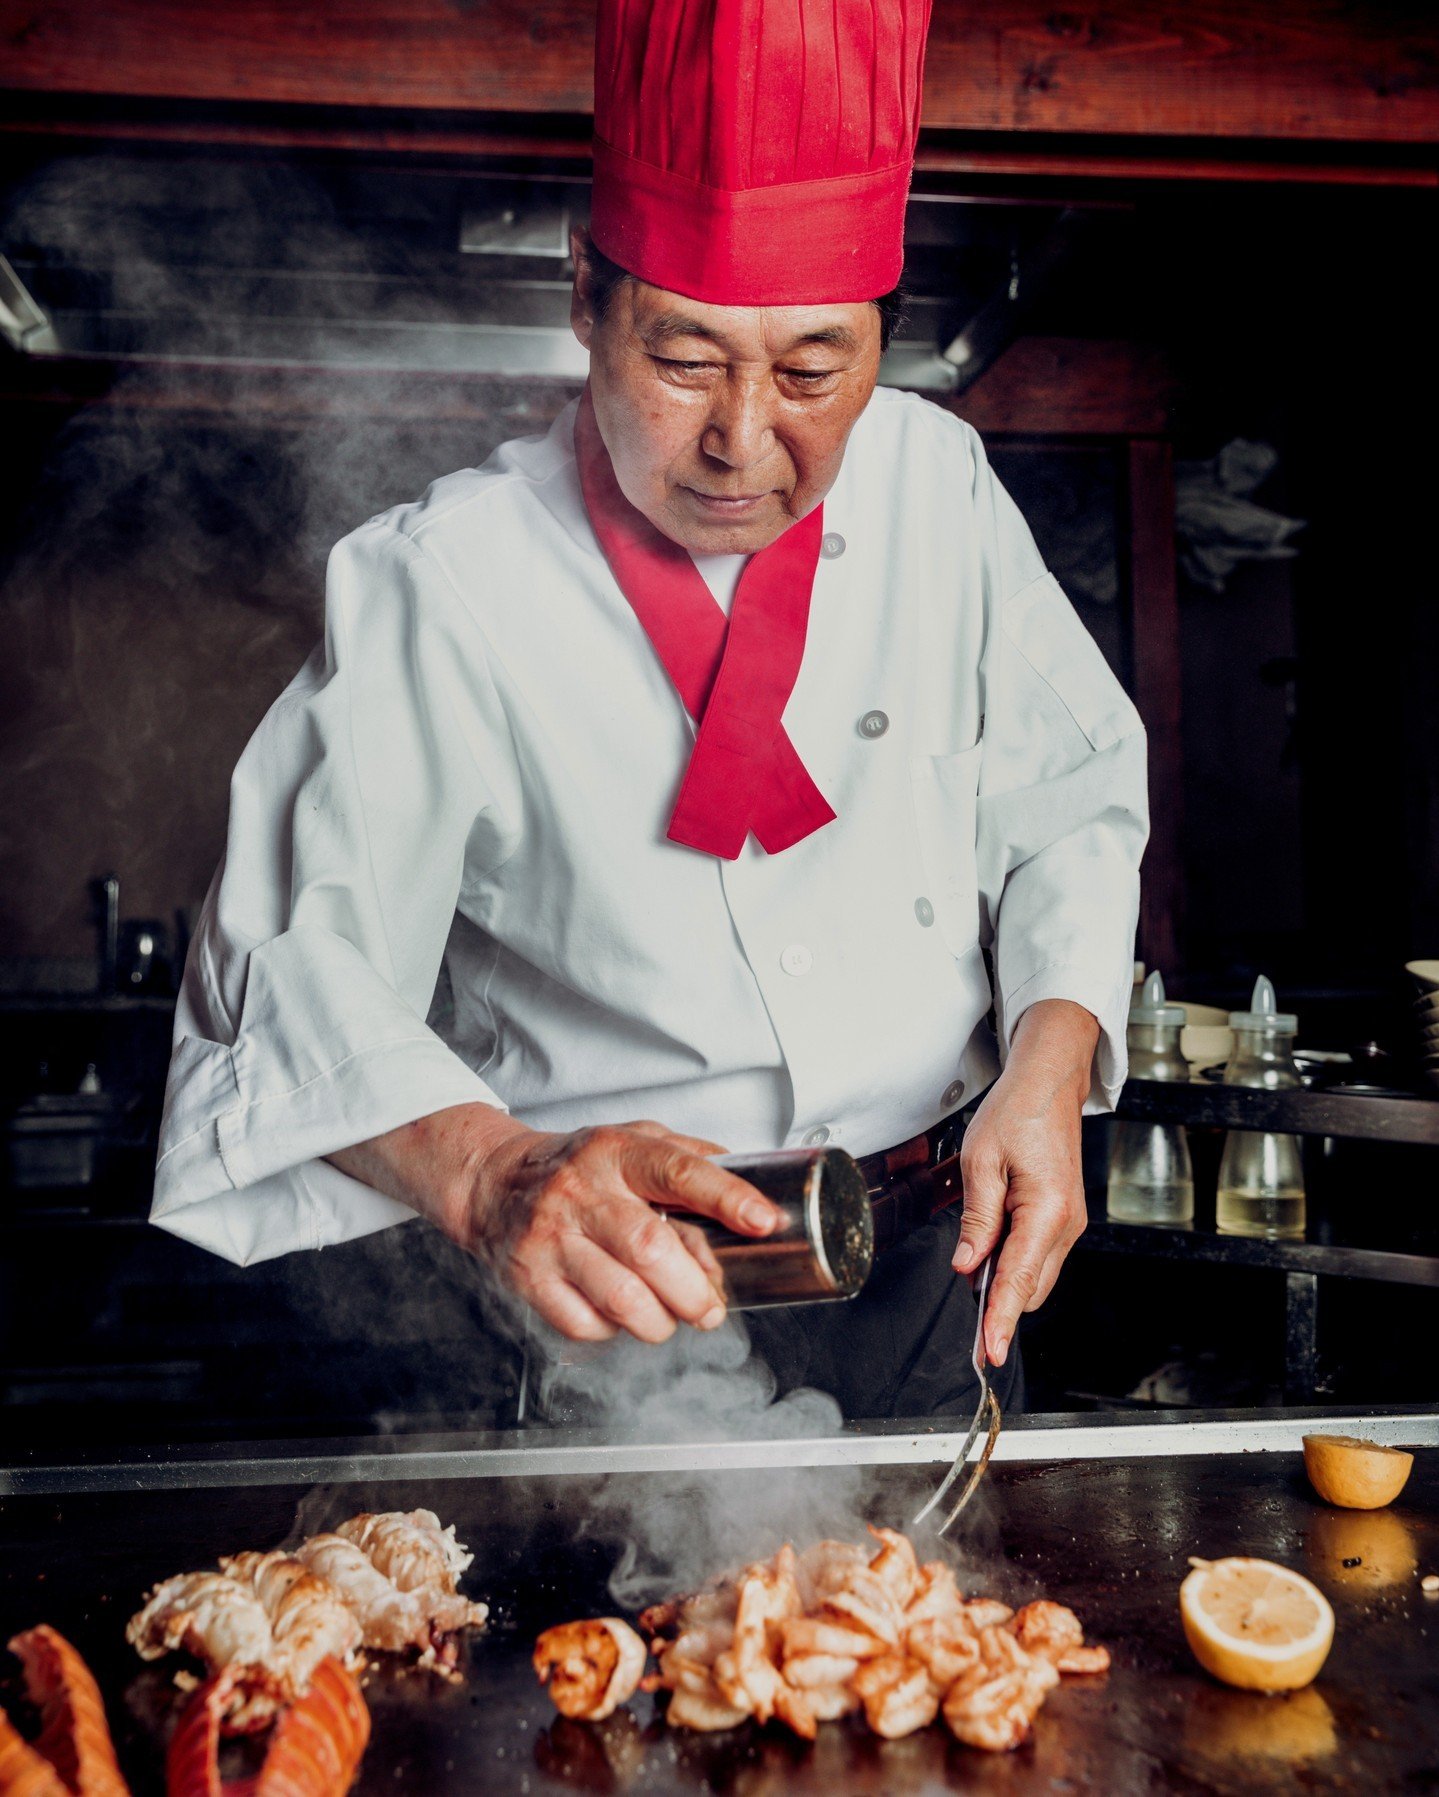 Discover the magic of 'teppanyaki' at Hana Japan! In Japanese, 'teppan' means 'metal grill' and 'yaki' means 'to grill,' bringing the sizzle and spectacle of live cooking right to your table. 

Prepare to be dazzled as our skilled chefs turn every me